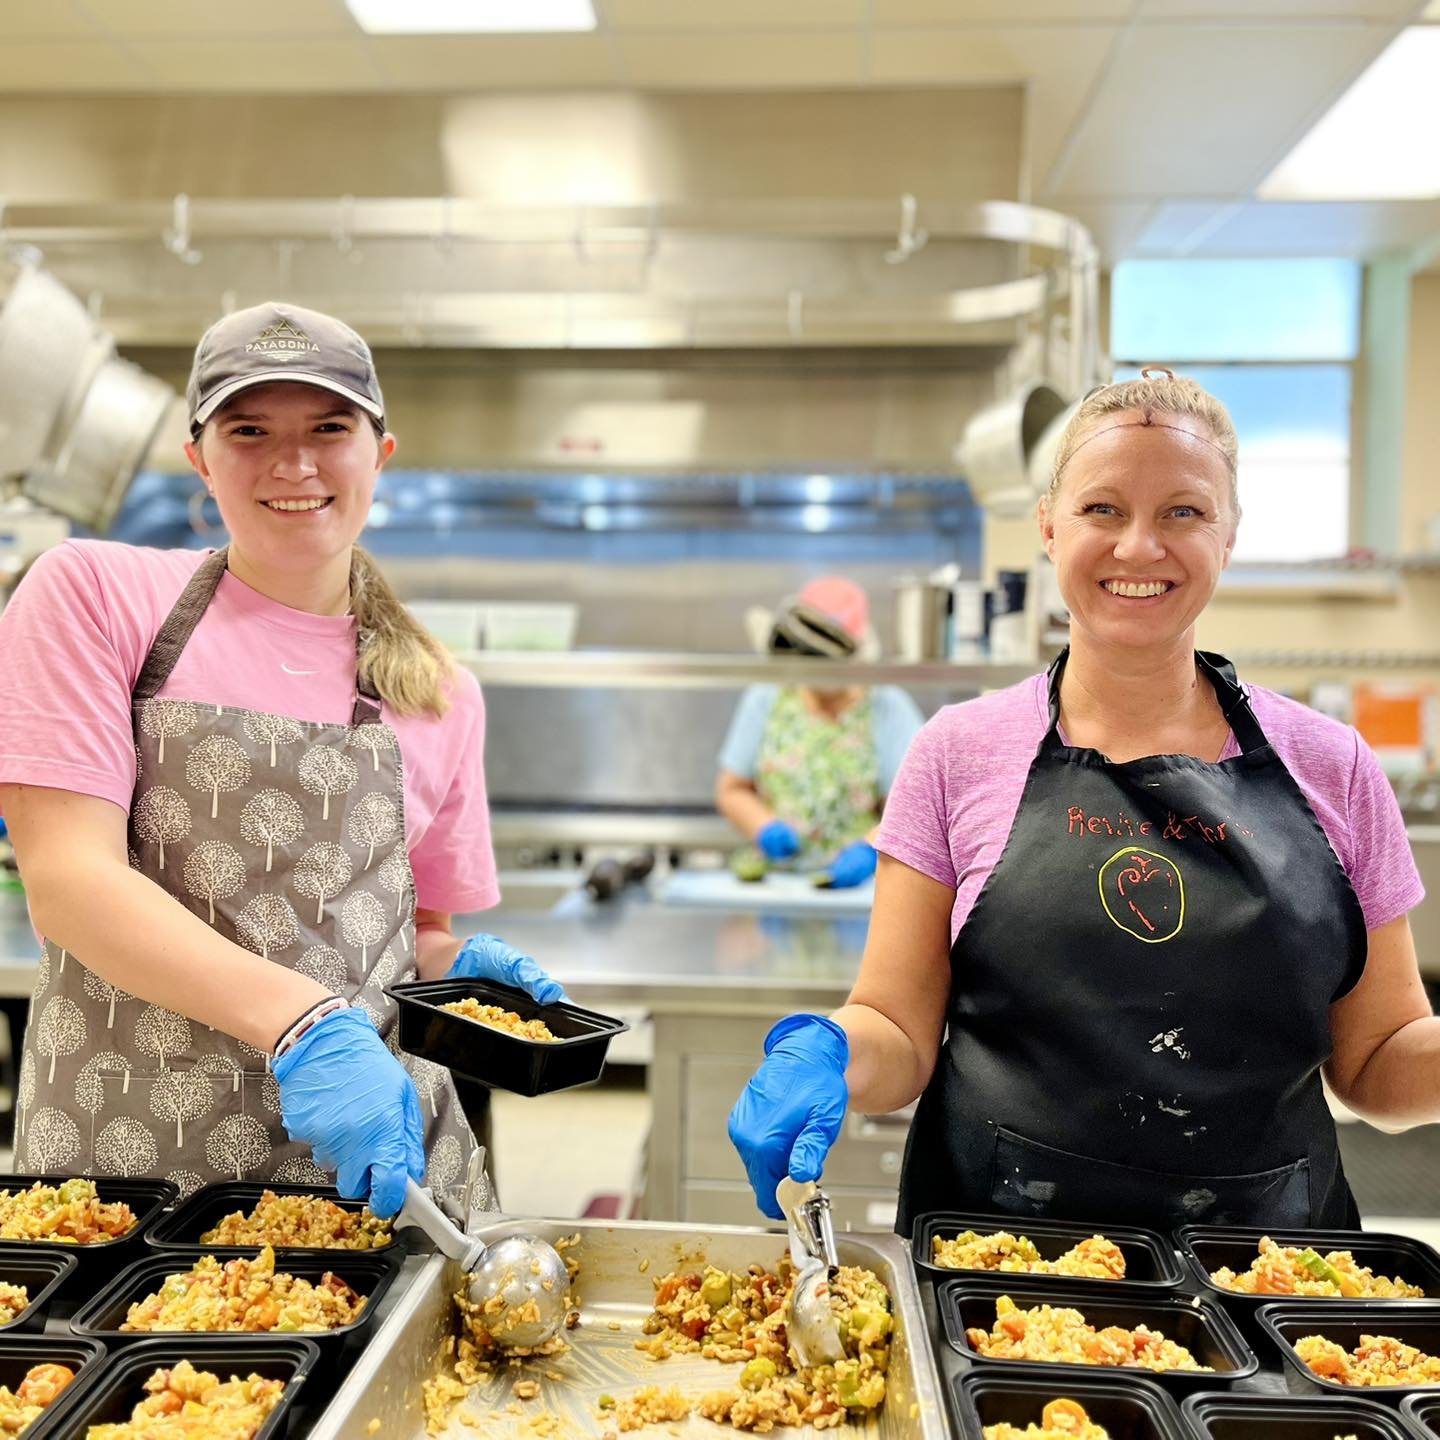 We would love to see you in the Revive &amp; Thrive kitchen this week and throughout the summer! Join our volunteer team and make our mission a reality &ndash; providing nourishing meals for those facing a health crisis in greater Grand Rapids, while